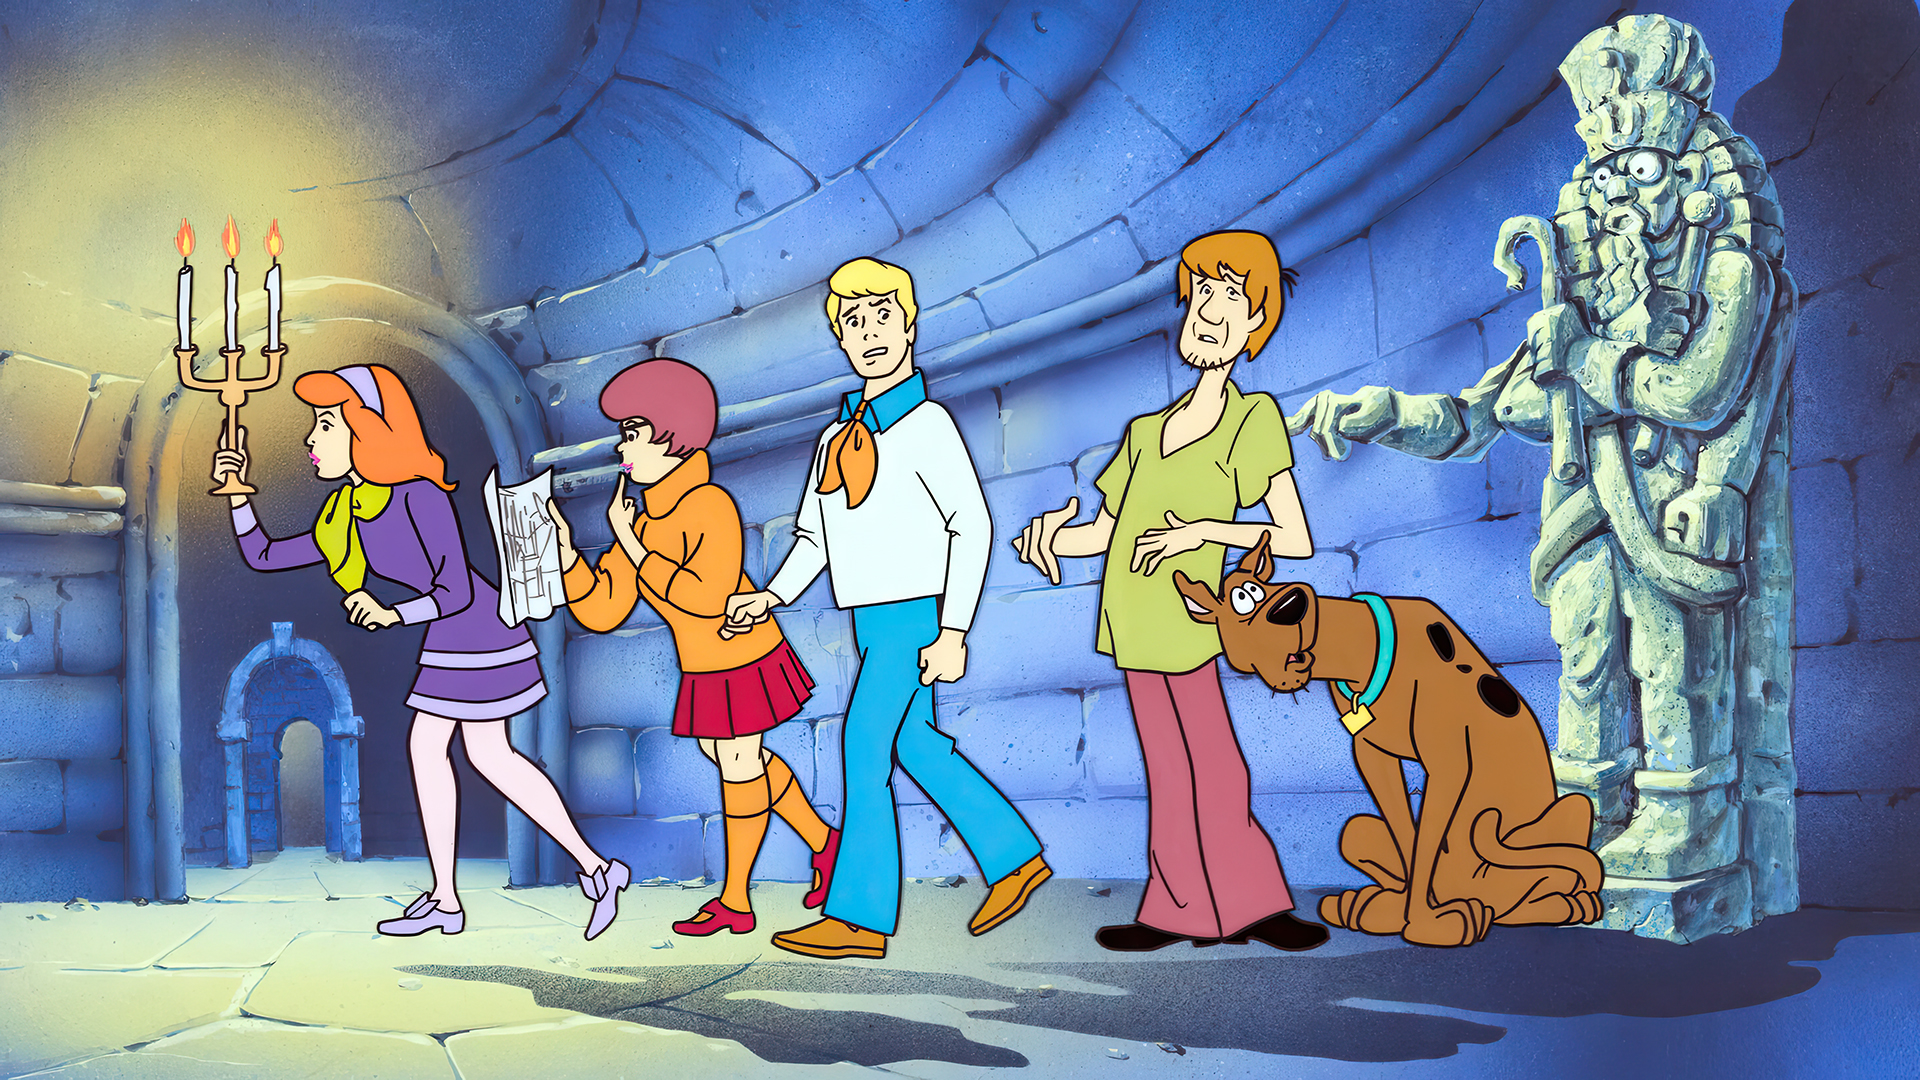 General 1920x1080 Scooby-Doo Daphne Blake Velma Dinkley Fred Jones shaggy animation animated series cartoon Hanna-Barbera production cel chandeliers statue map candles